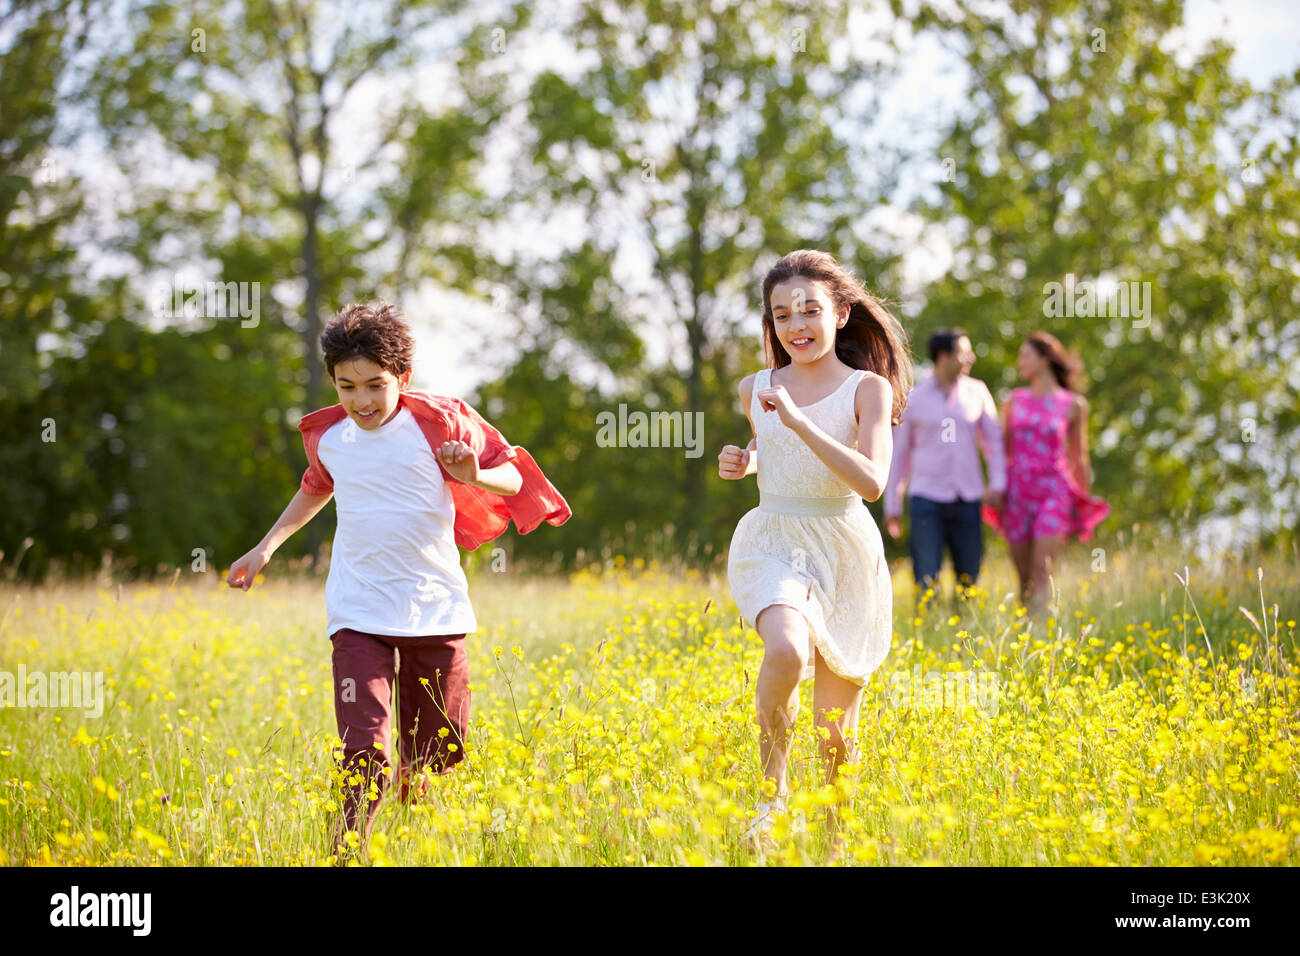 Hispanic Family Walking in Countryside Banque D'Images